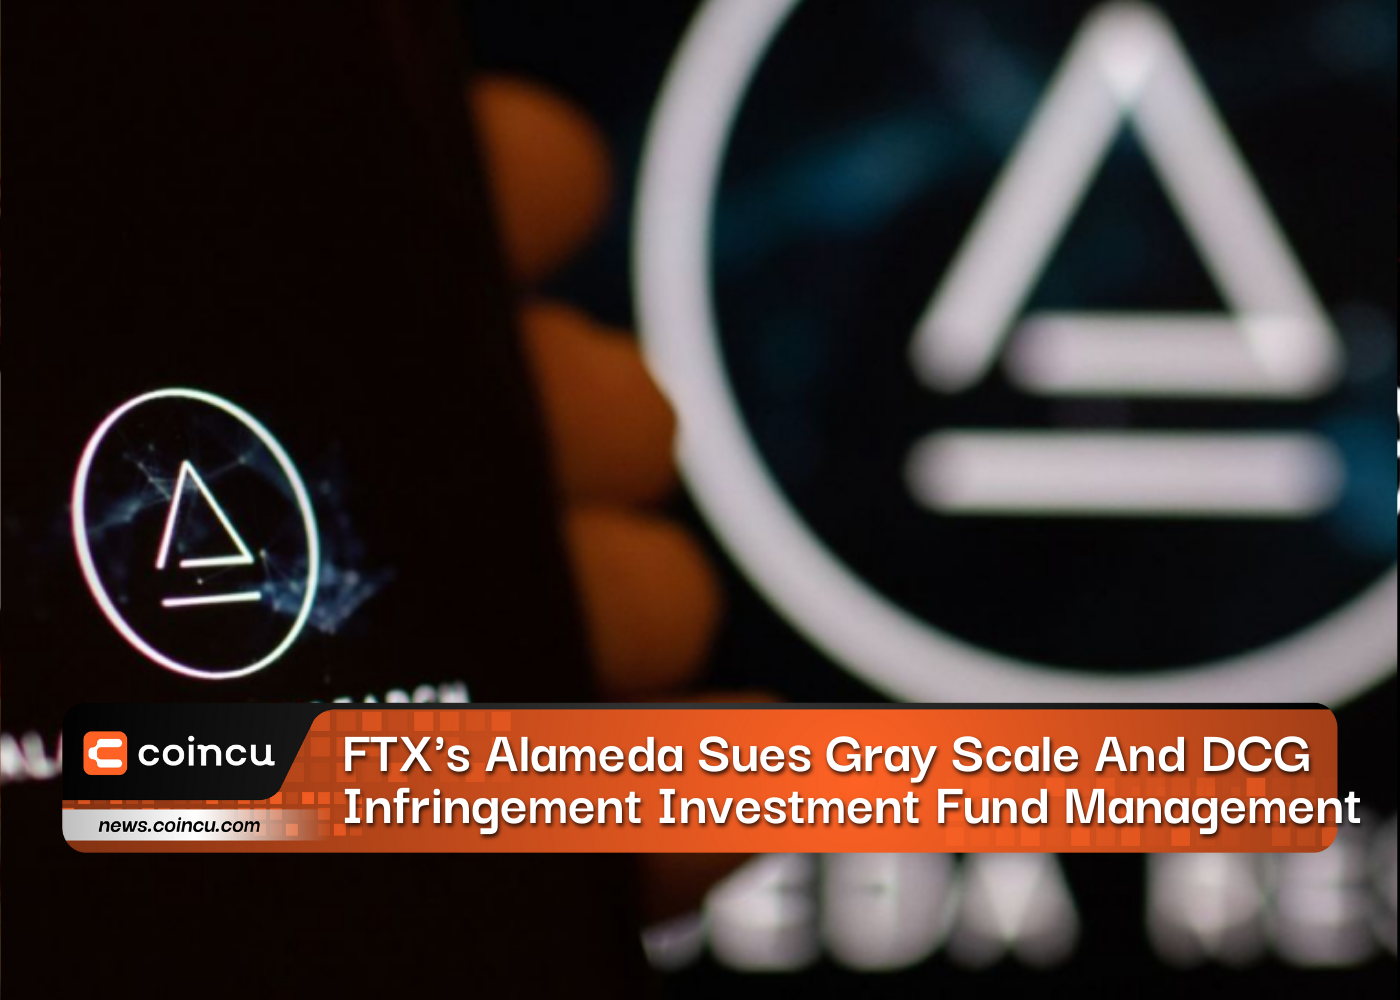 FTX's Alameda Sues Gray Scale And DCG For Infringement Of Investment Fund Management